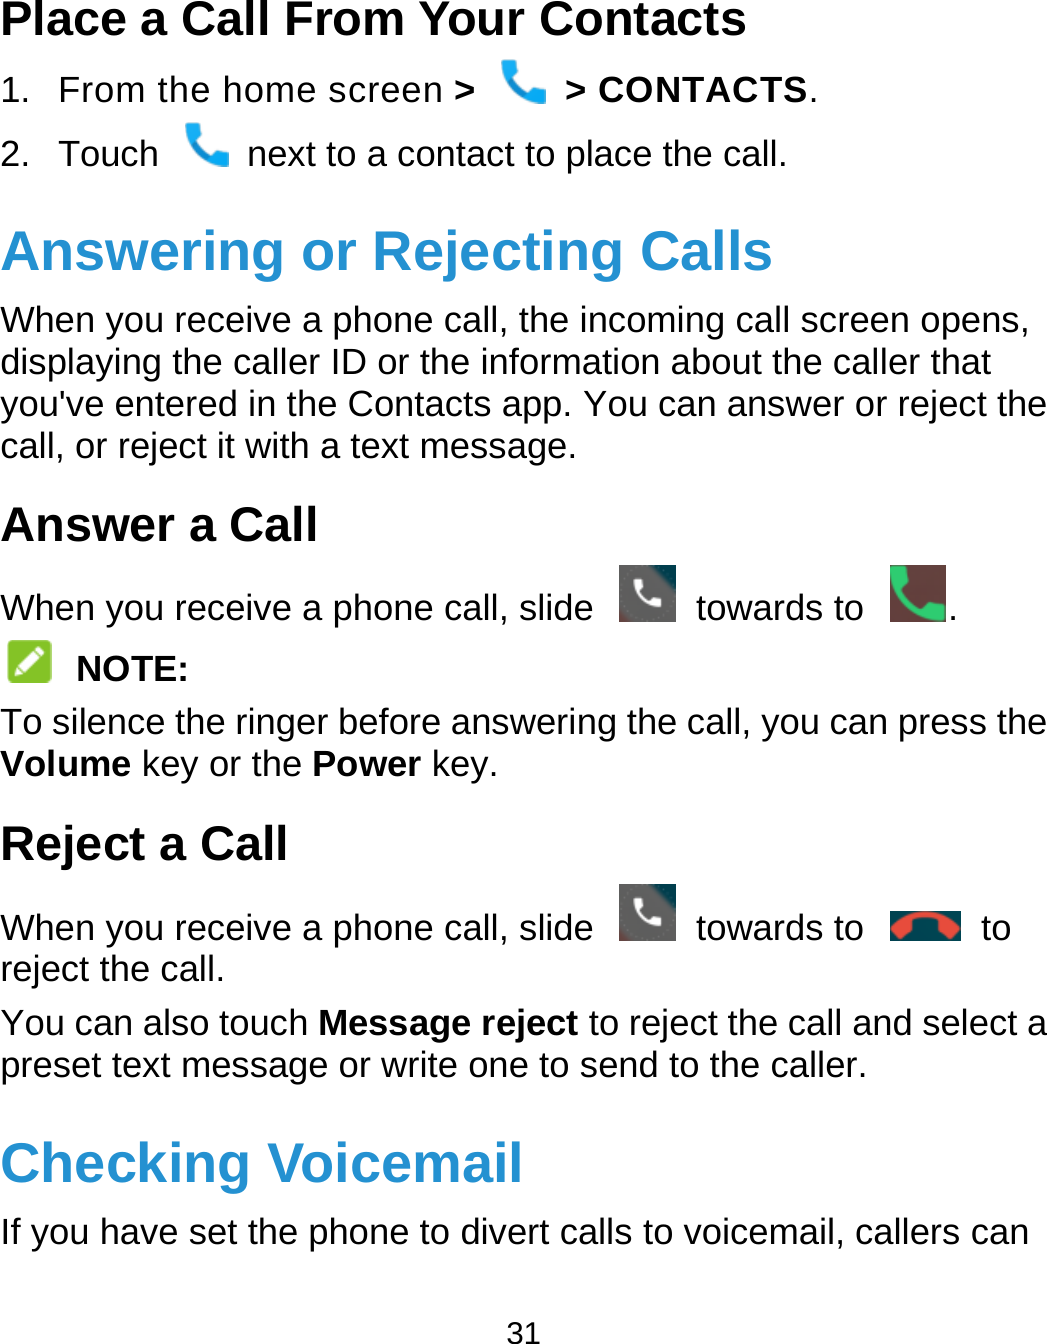  31 Place a Call From Your Contacts 1. From the home screen &gt;  &gt; CONTACTS. 2.  Touch    next to a contact to place the call. Answering or Rejecting Calls When you receive a phone call, the incoming call screen opens, displaying the caller ID or the information about the caller that you&apos;ve entered in the Contacts app. You can answer or reject the call, or reject it with a text message. Answer a Call When you receive a phone call, slide    towards to  .  NOTE: To silence the ringer before answering the call, you can press the Volume key or the Power key. Reject a Call When you receive a phone call, slide    towards to    to reject the call. You can also touch Message reject to reject the call and select a preset text message or write one to send to the caller. Checking Voicemail If you have set the phone to divert calls to voicemail, callers can 